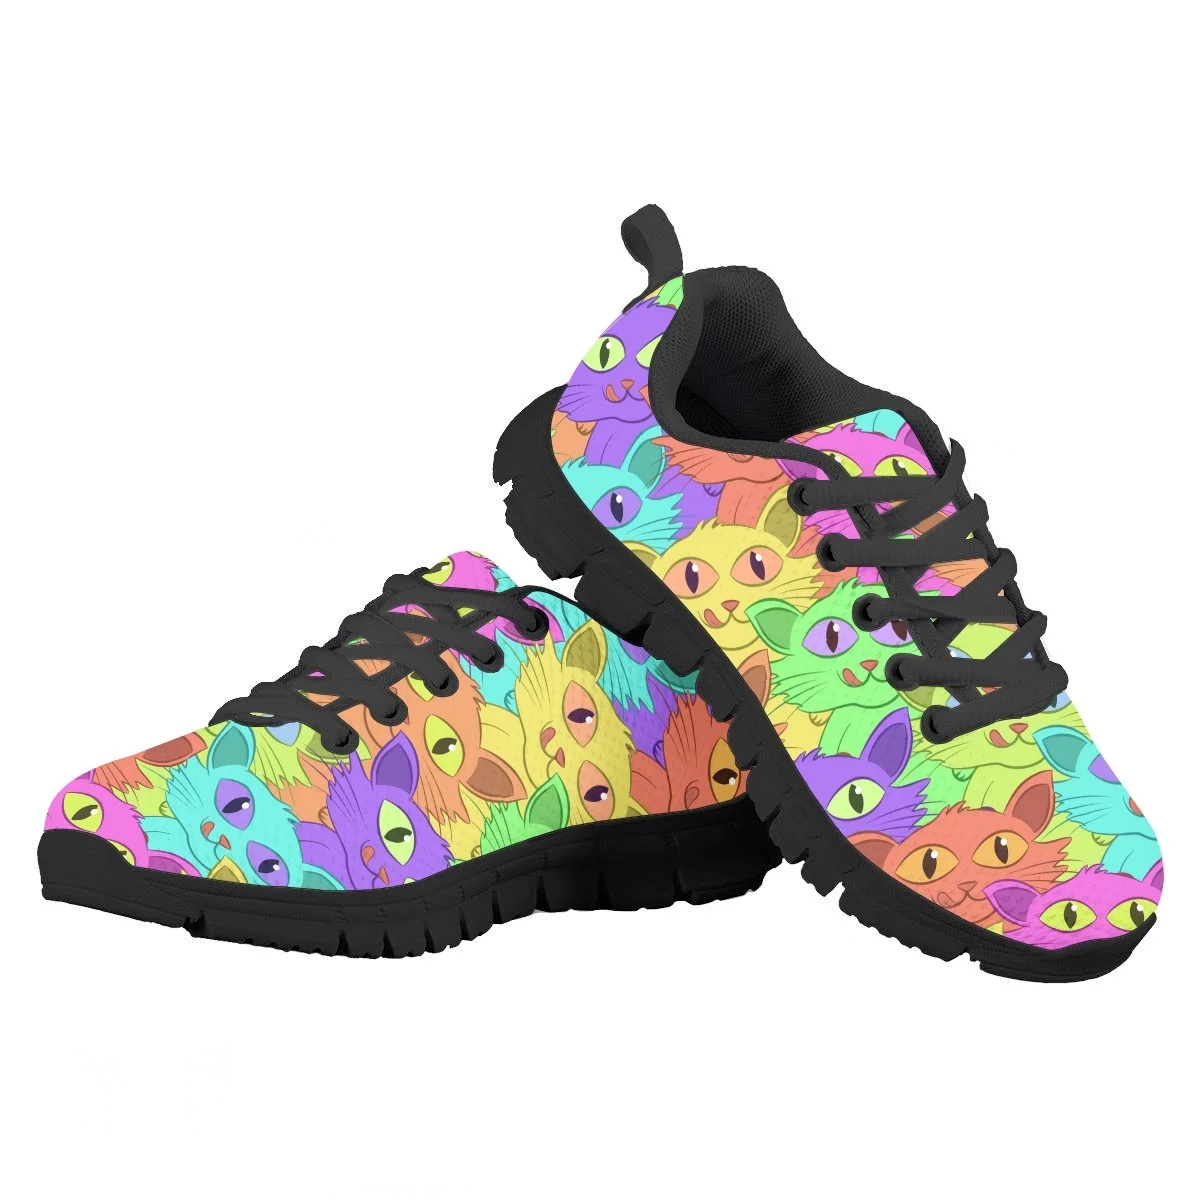 Kawaii Gradient Cat Pattern Children's Running Shoes Outdoor Travel Wear-Resistant Footwaer Brand Design Breathable Sneakers New brand for my son подгузники travel pack s 4 8 кг 5